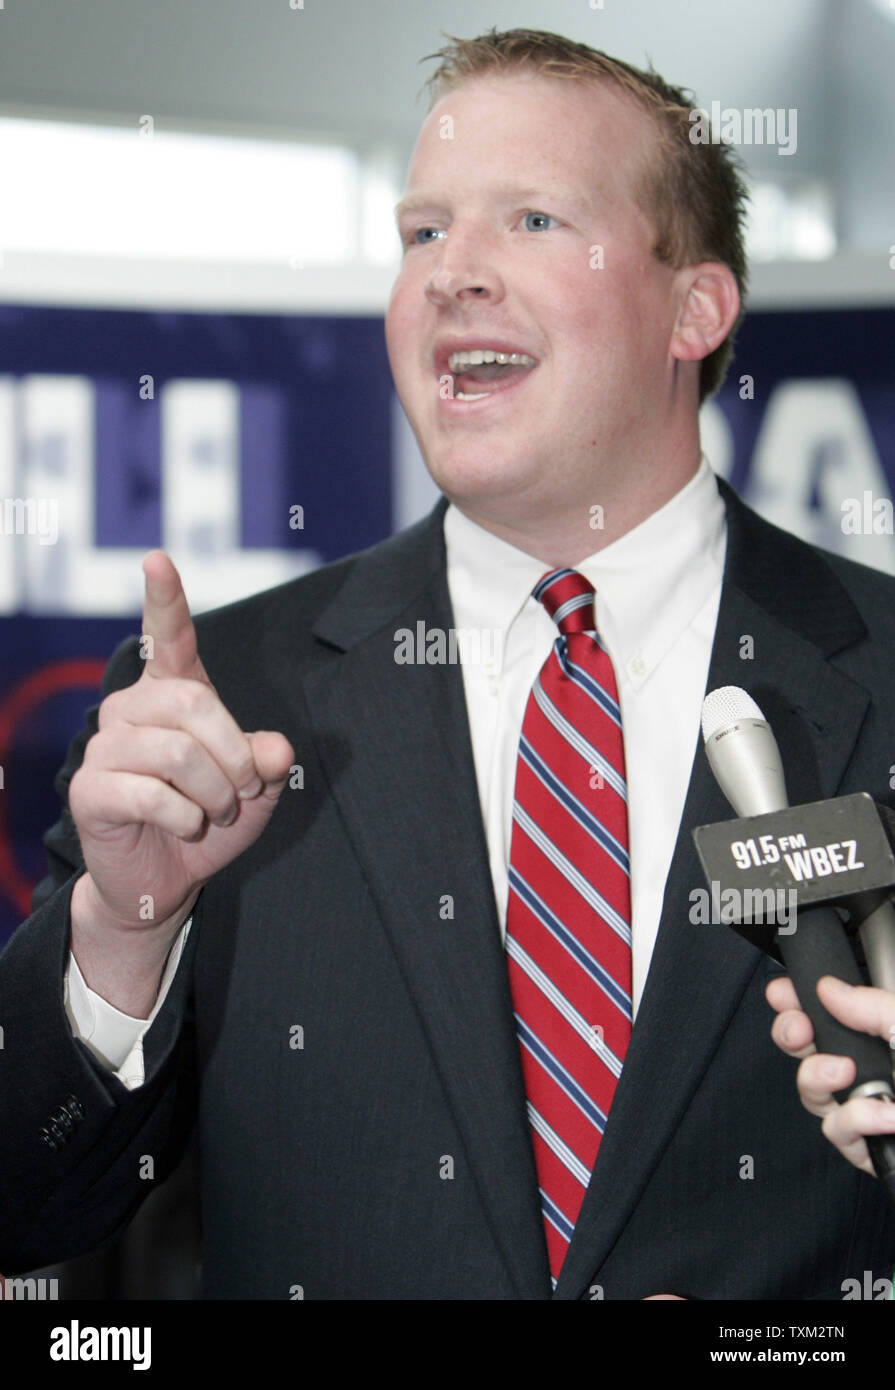 Illinois Republican candidate for Lt. Governor Jason Plumer addresses supporters during a campaign stop at Willard Airport with other members of the Republican state ticket in Champaign, IL., November 1, 2010.  UPI Photo/Mark Cowan Stock Photo